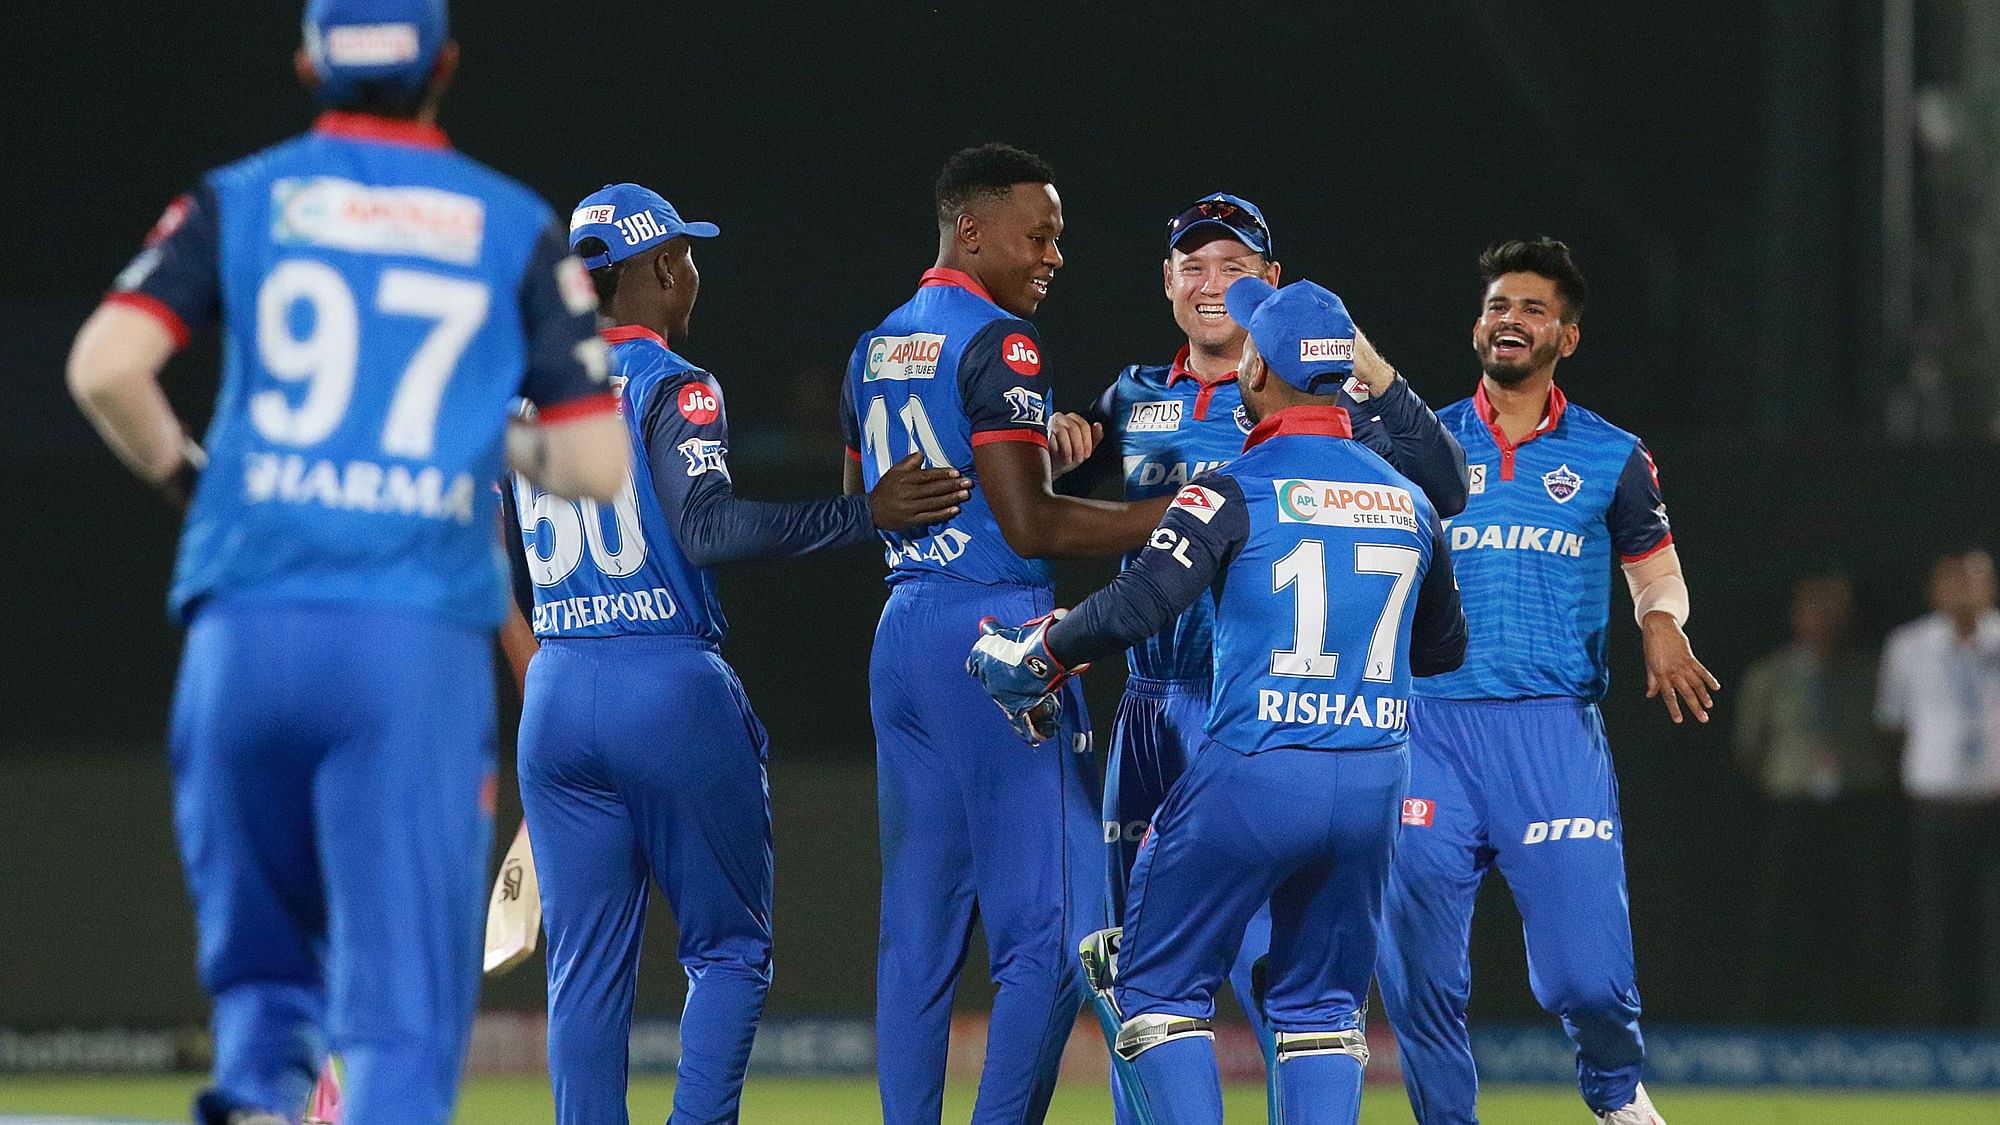 From Rabada to Rishabh, Delhi’s success story in IPL 2019 is about a team rather than an individual.